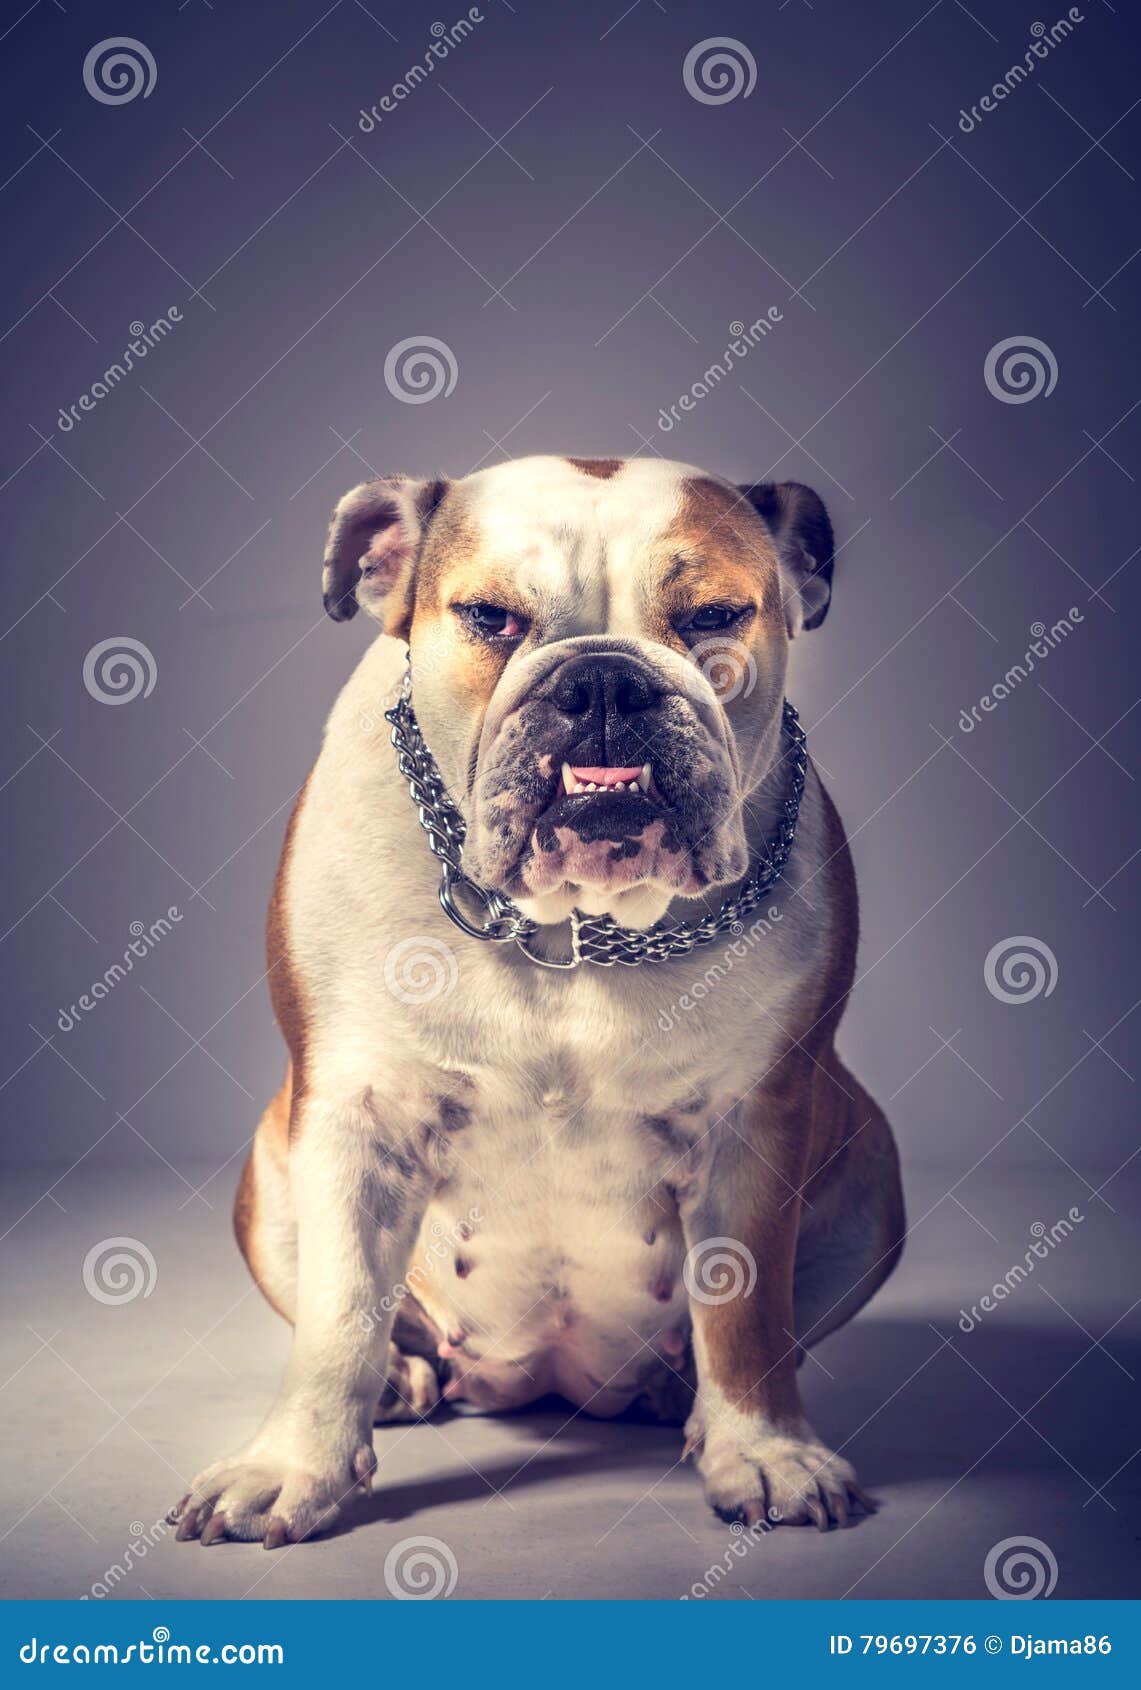 are bulldogs angry